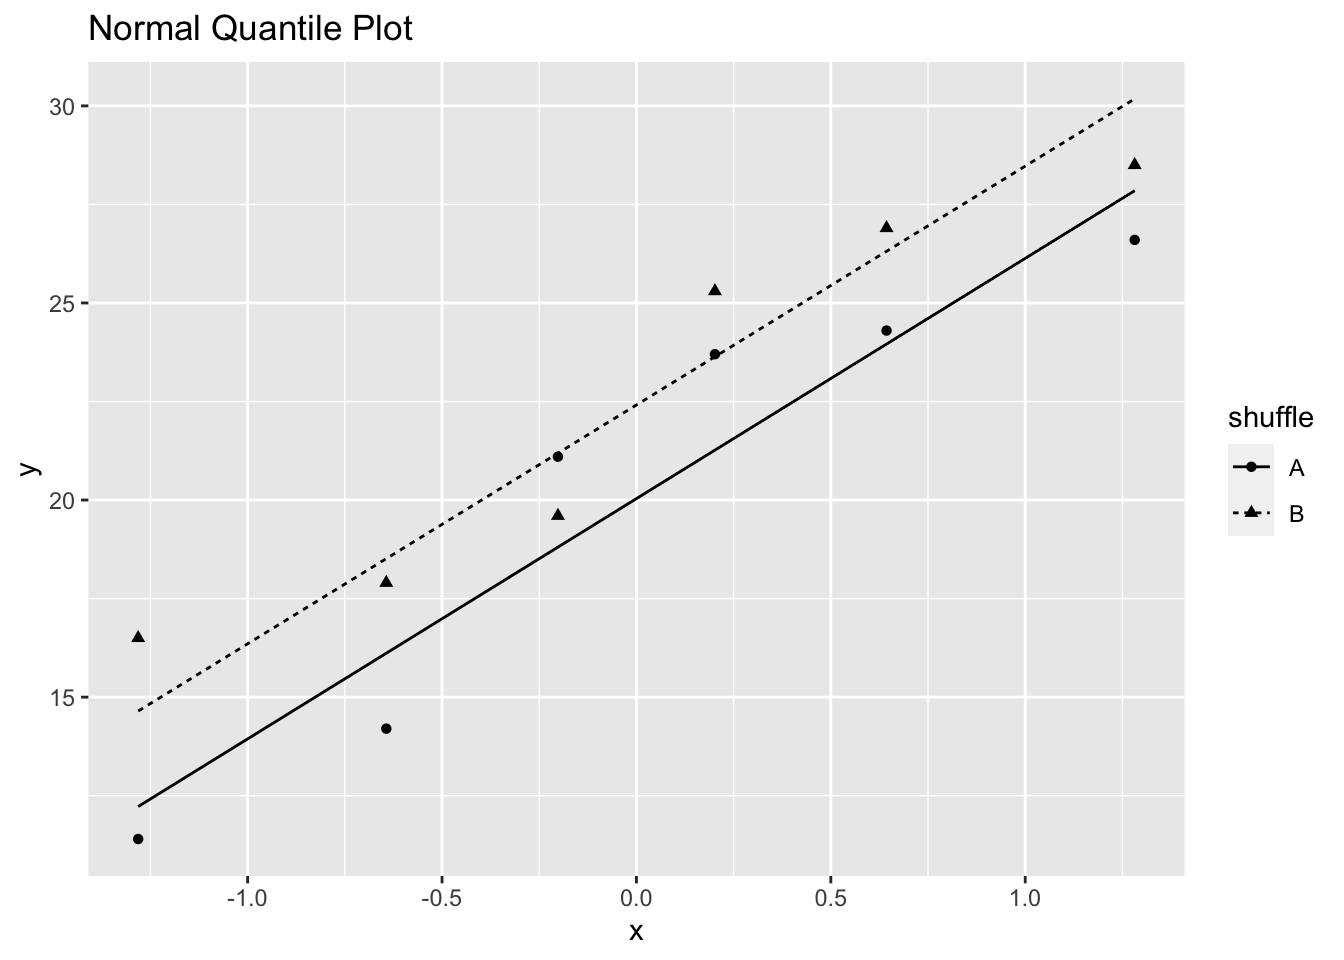 Normal Quantile Plot of Fertilizer Yield in Example 3.1